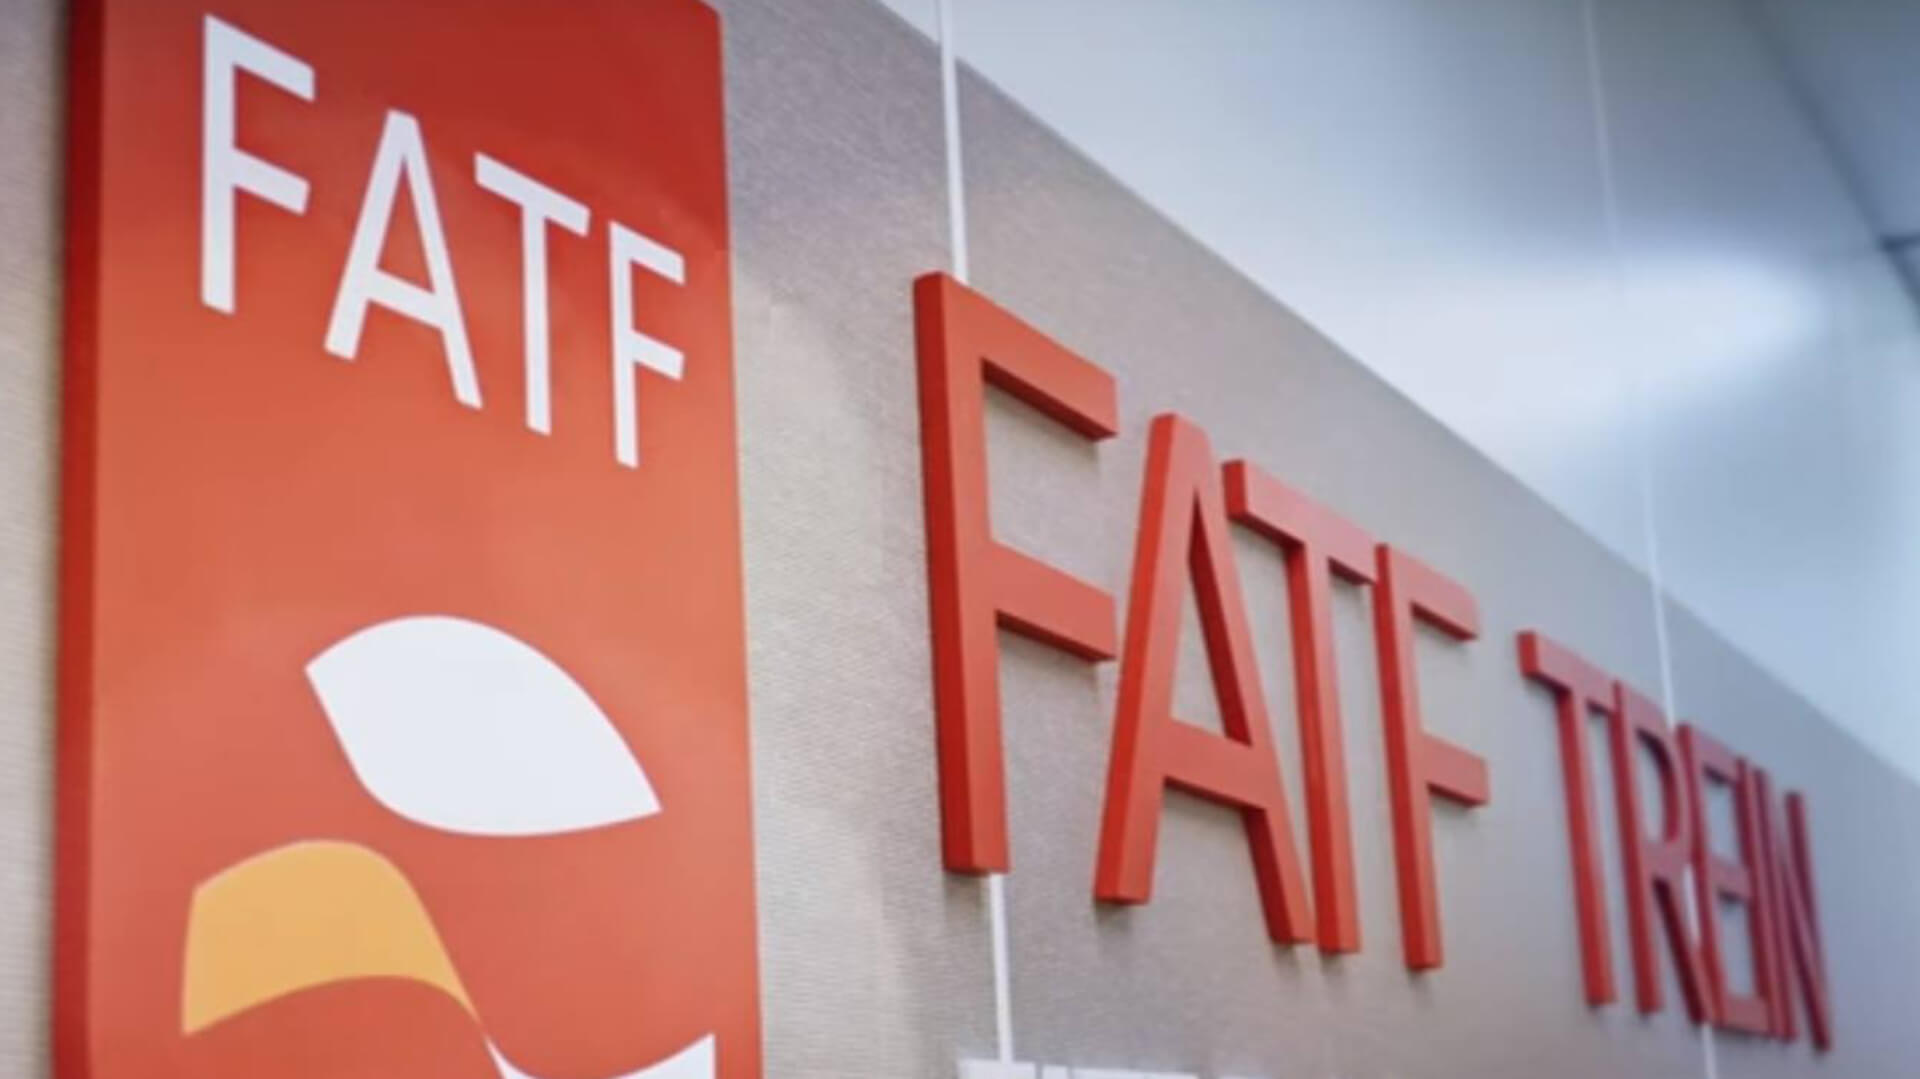 Quick Look: Outcomes of the Financial Action Task Force (FATF) Plenary Meeting, Feb. 2021